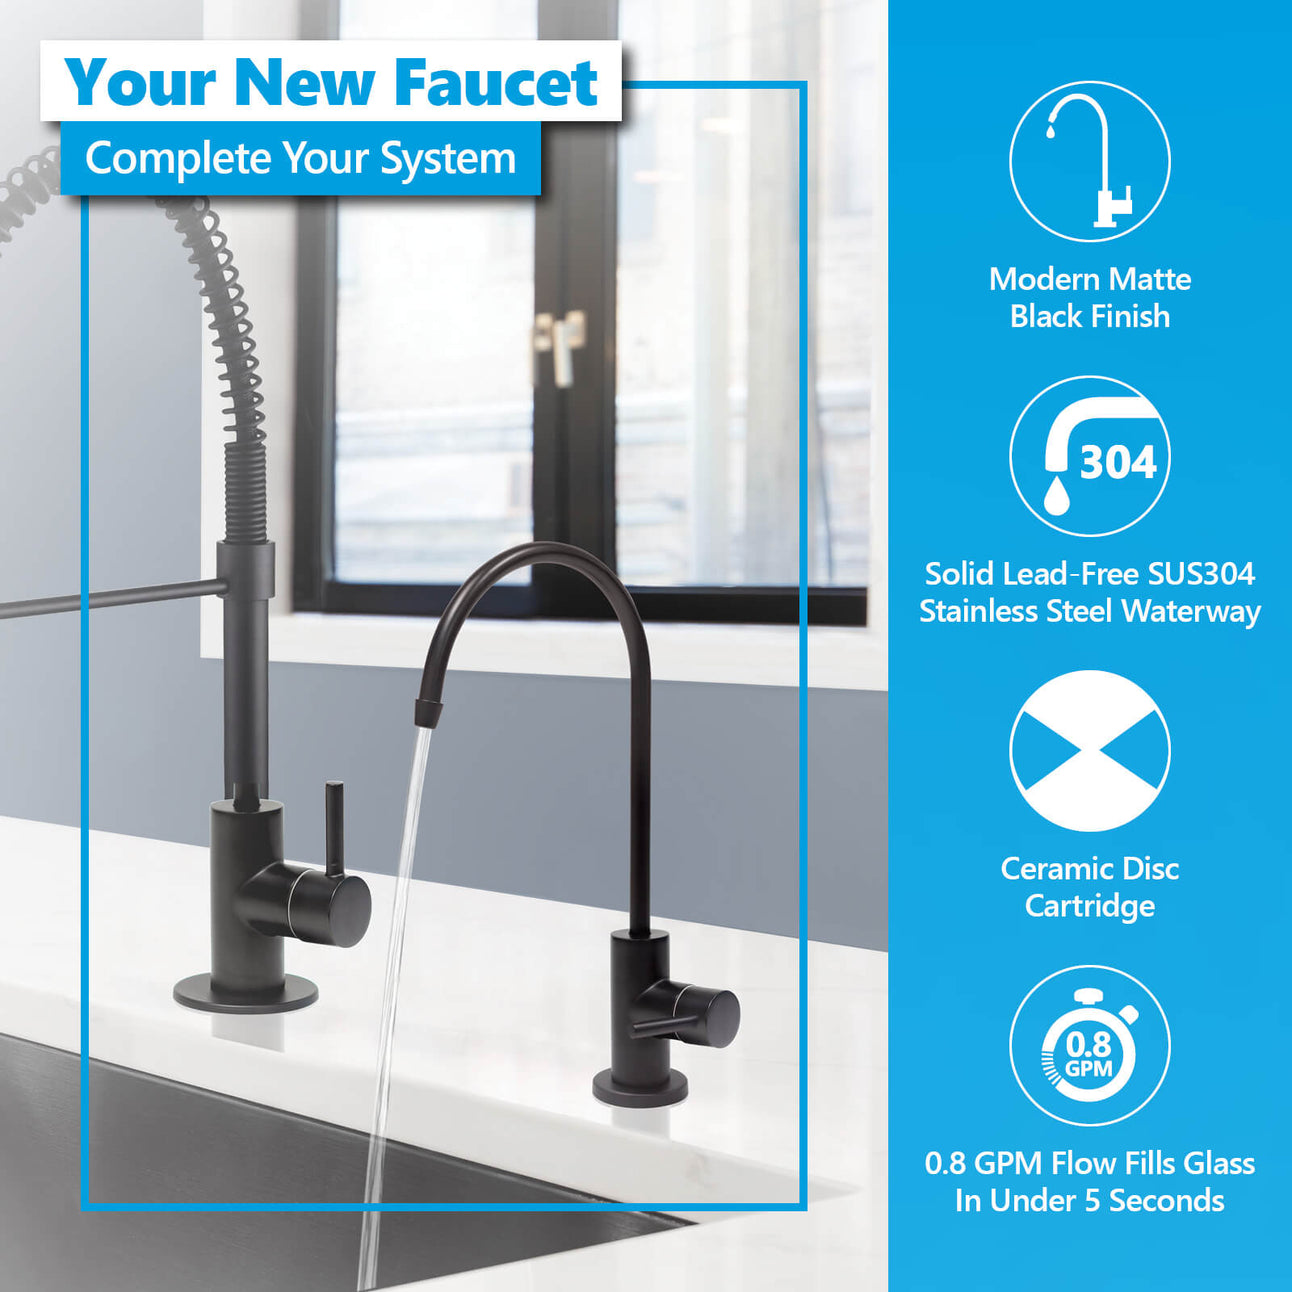 Express Water Modern Water Filter Faucet – Matte Black Faucet – 100% Lead-Free Drinking Water Faucet – Compatible with Reverse Osmosis Water Filtration Systems